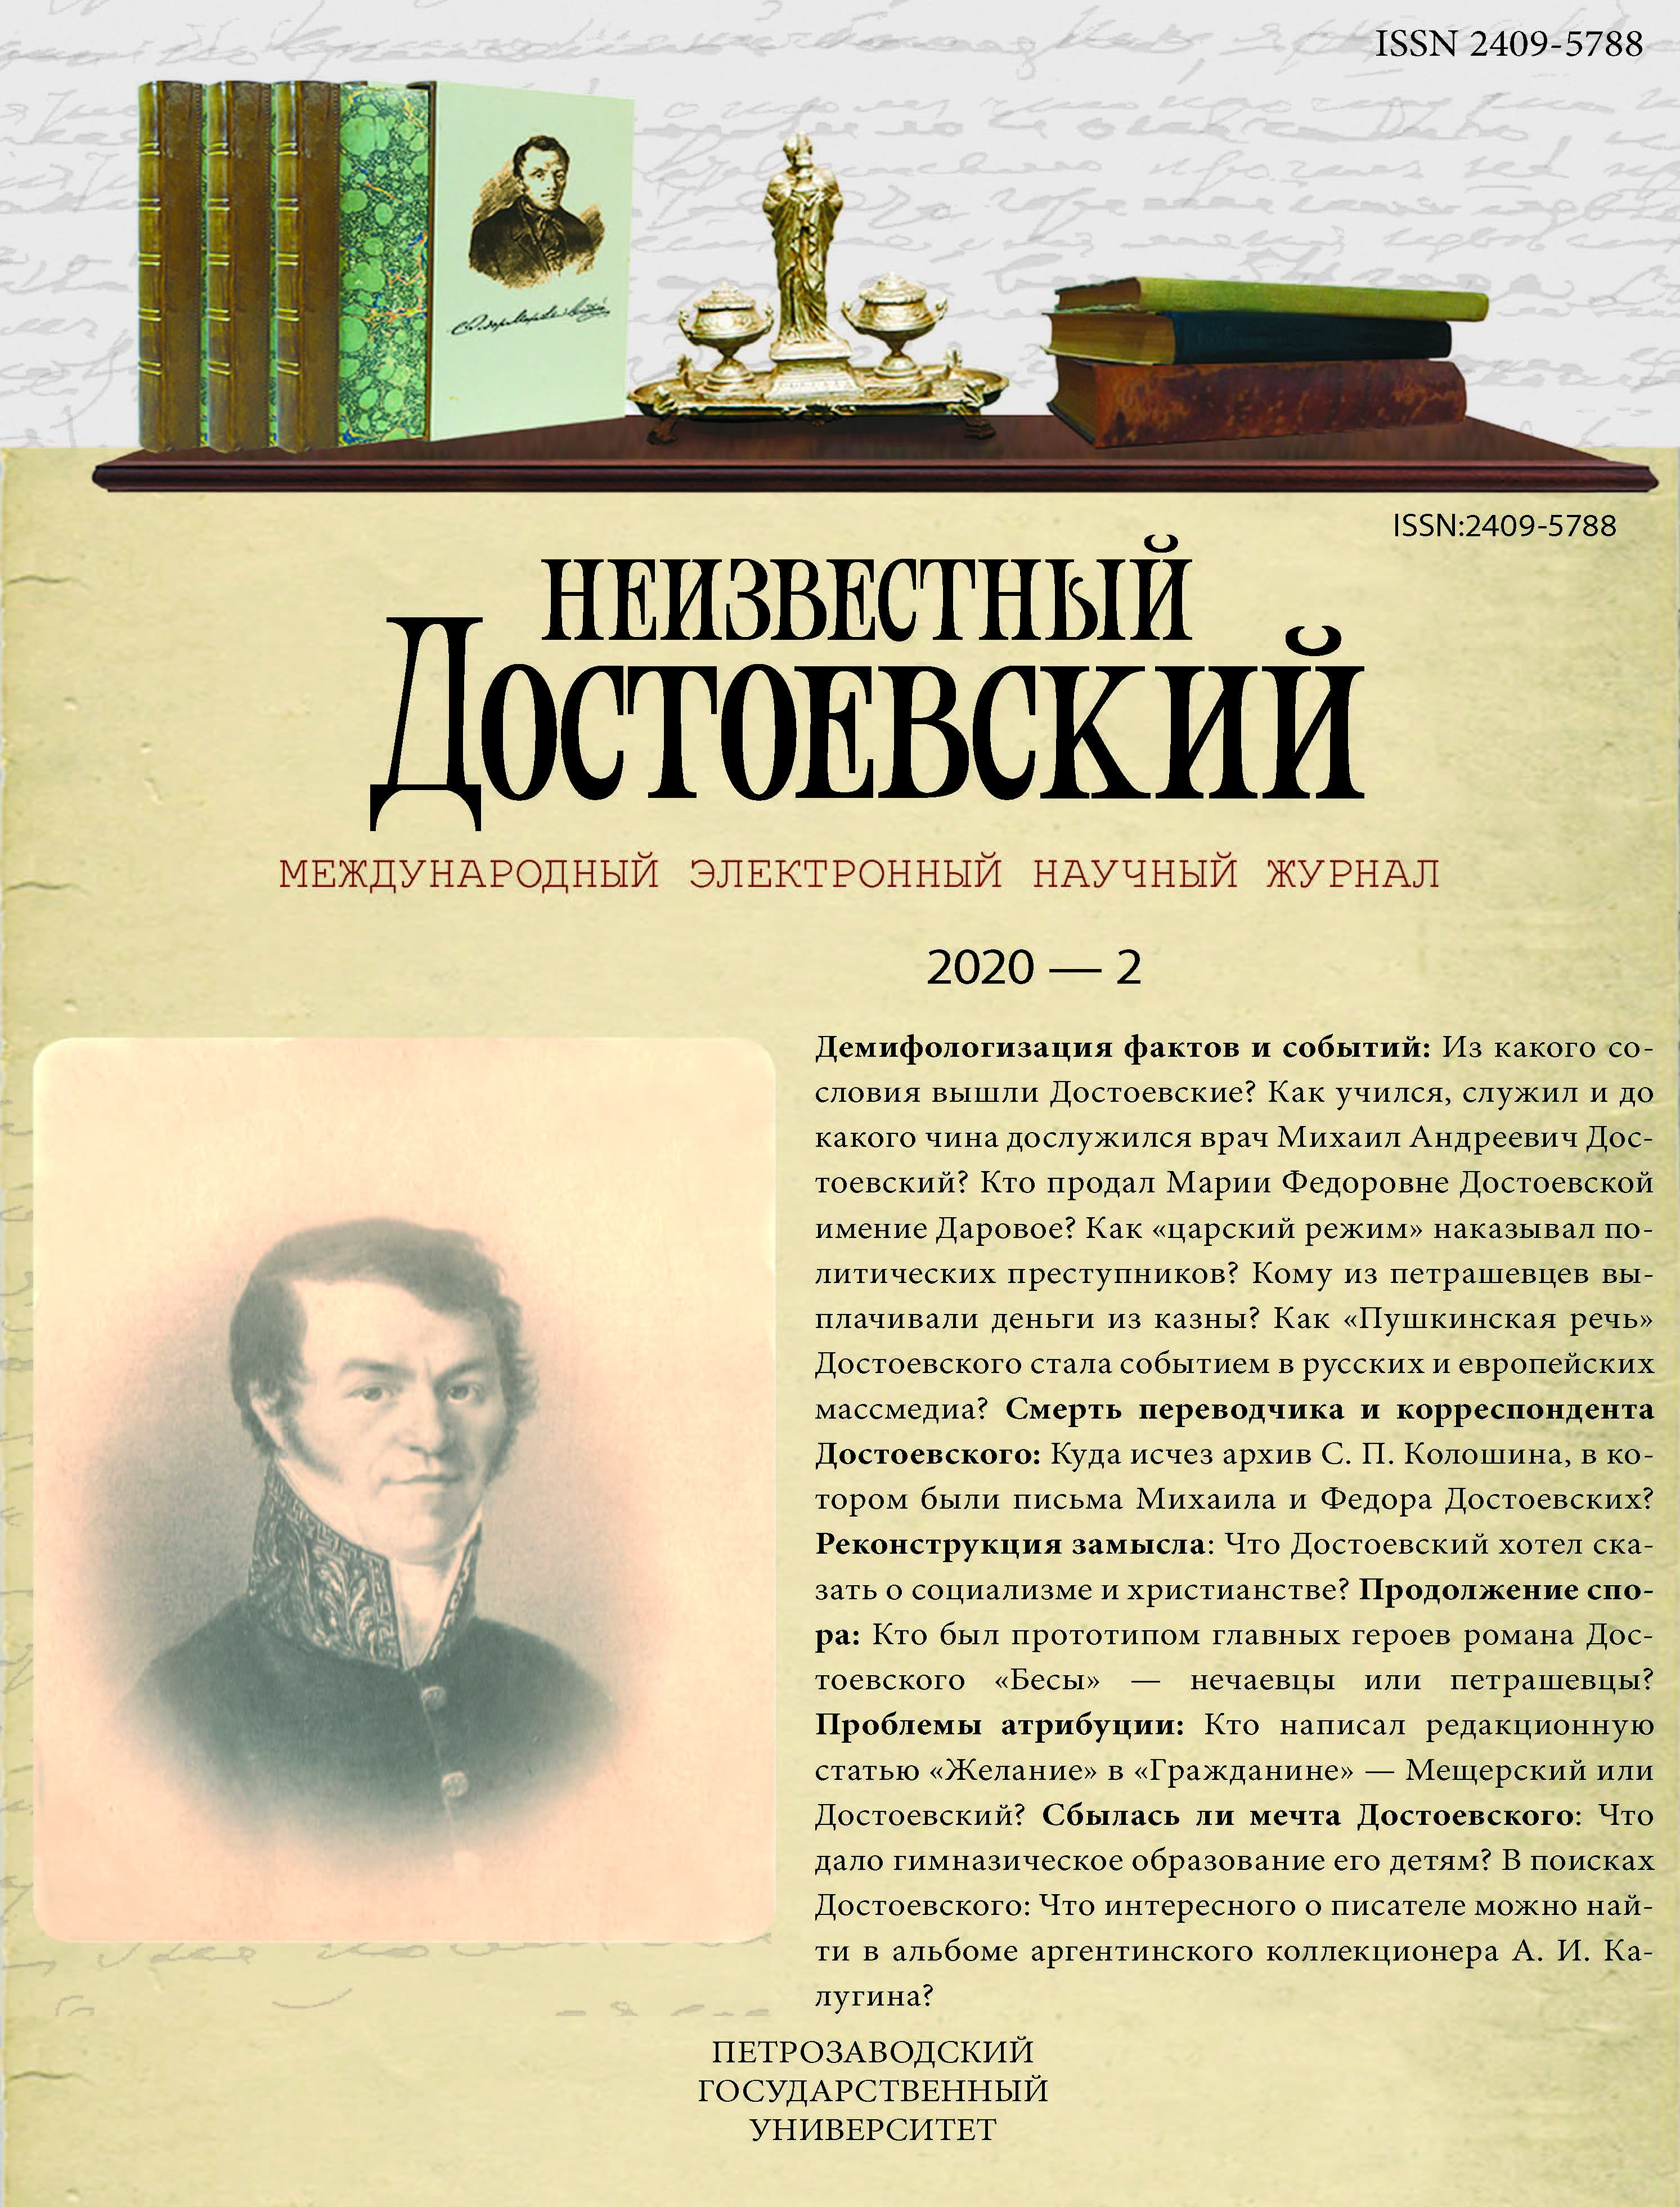 “My Husband's Lifelong Dream Was for Our Children to Get an Education...”: Gymnasium Students Lyuba and Fedya Dostoevsky Cover Image